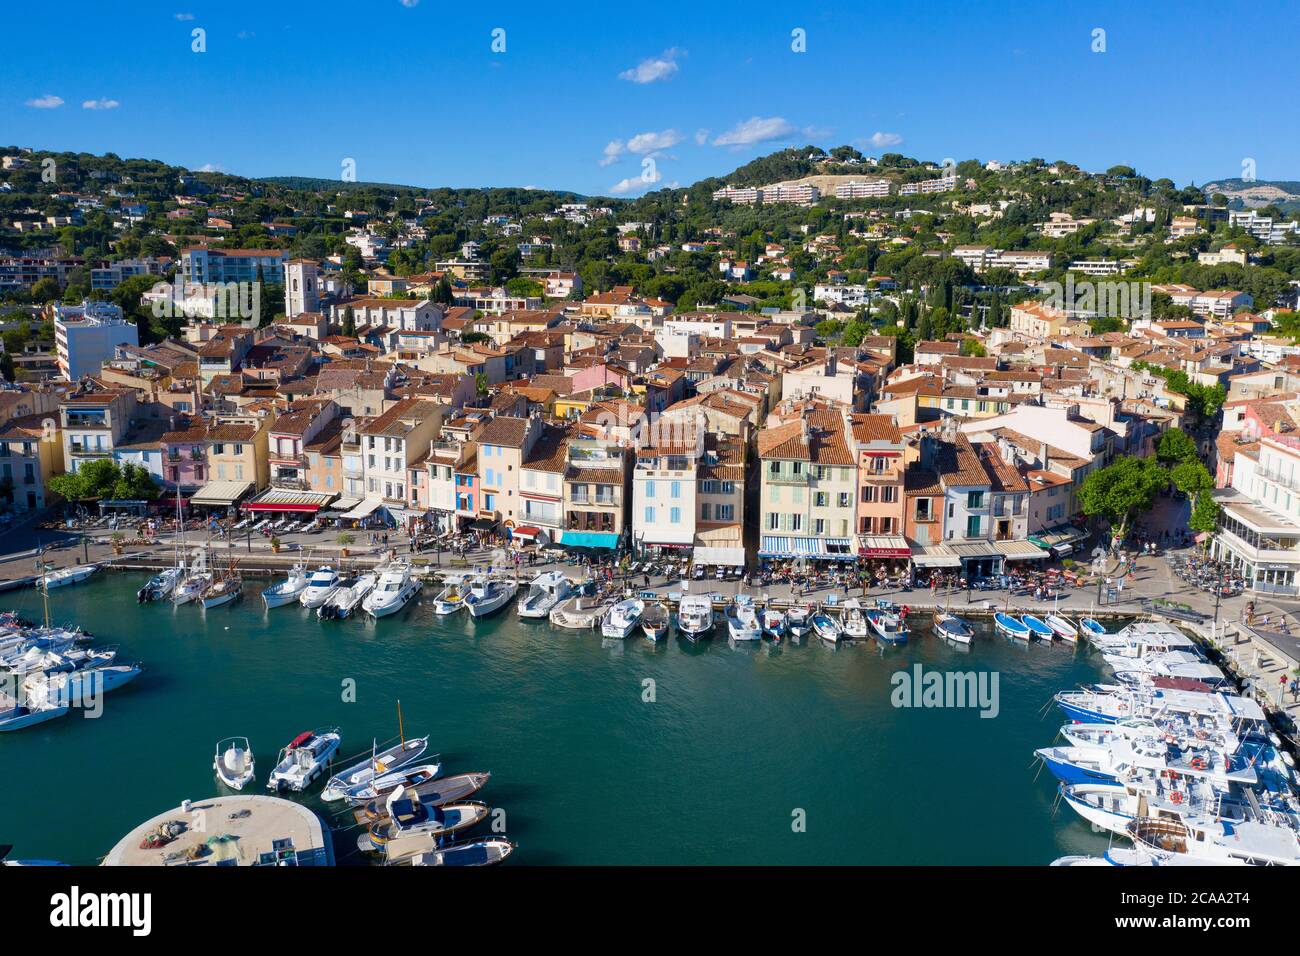 Aerial view of Cassis, a fishing village located near Marseille Stock Photo